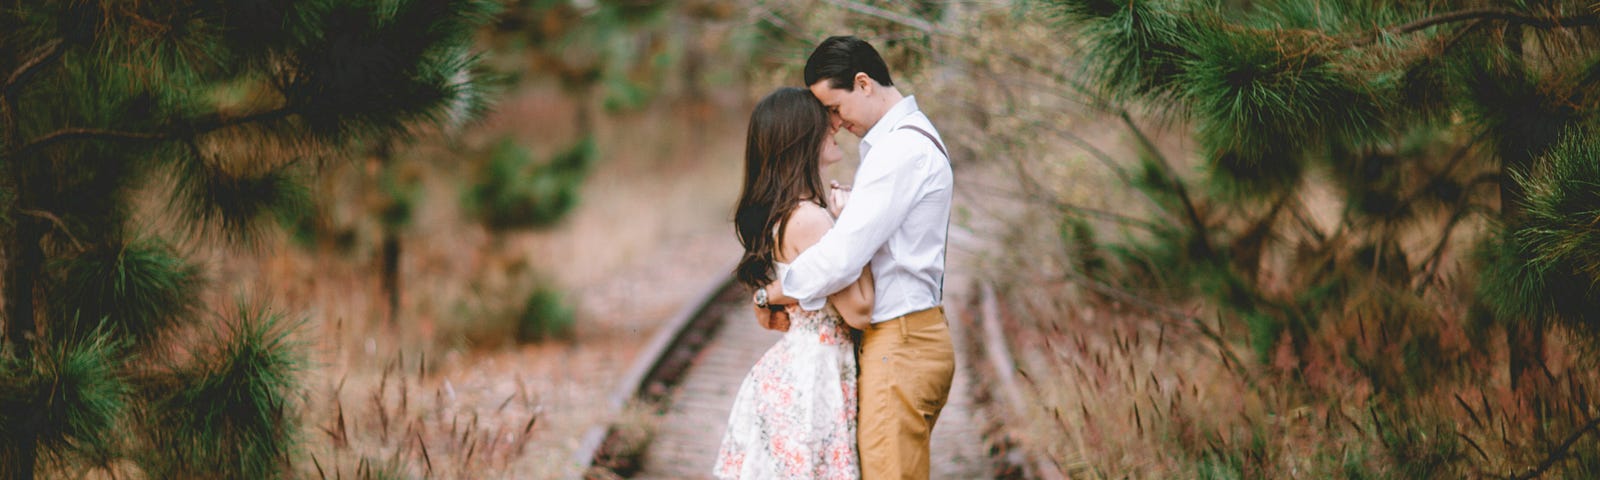 Couple standing together embraced on an old railroad track, surrounded by pine trees.